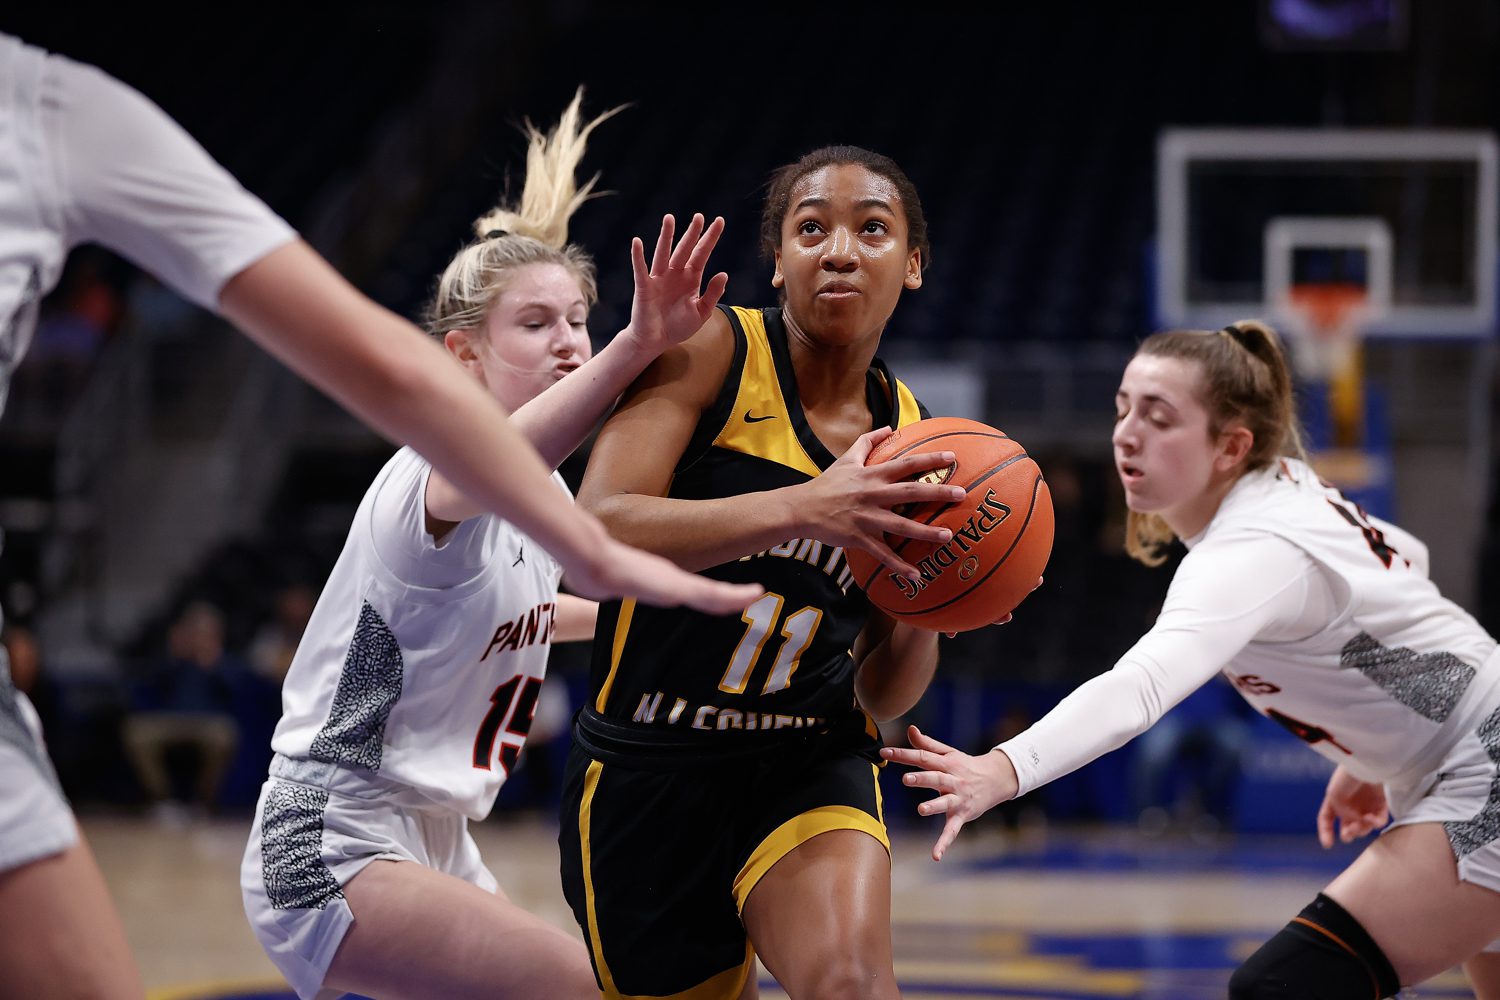 Pitt women's basketball first-year guard and former North Allegheny star Jasmine Timmerson